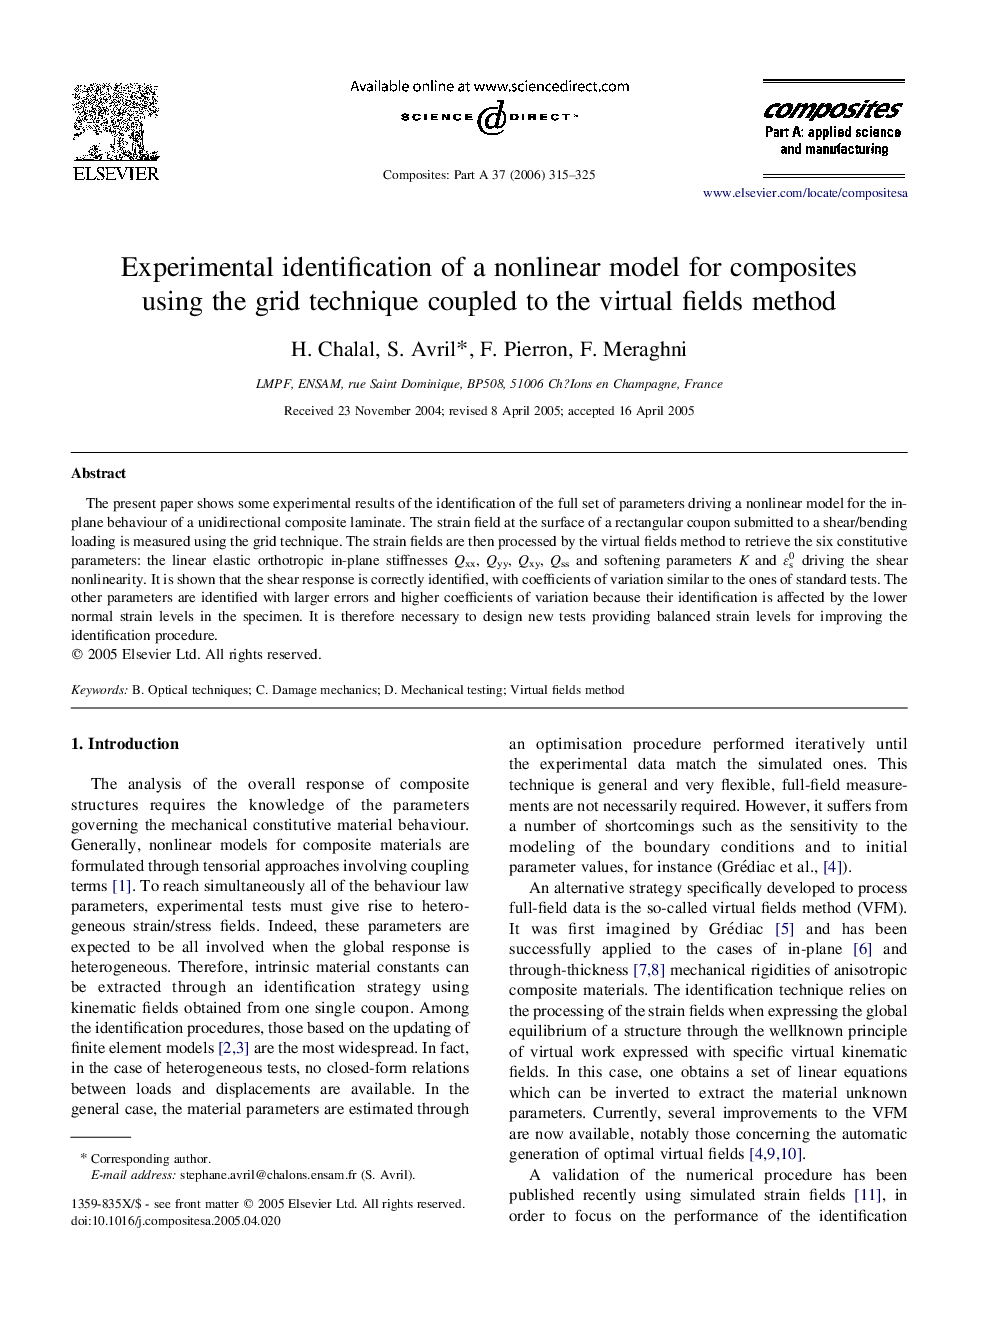 Experimental identification of a nonlinear model for composites using the grid technique coupled to the virtual fields method